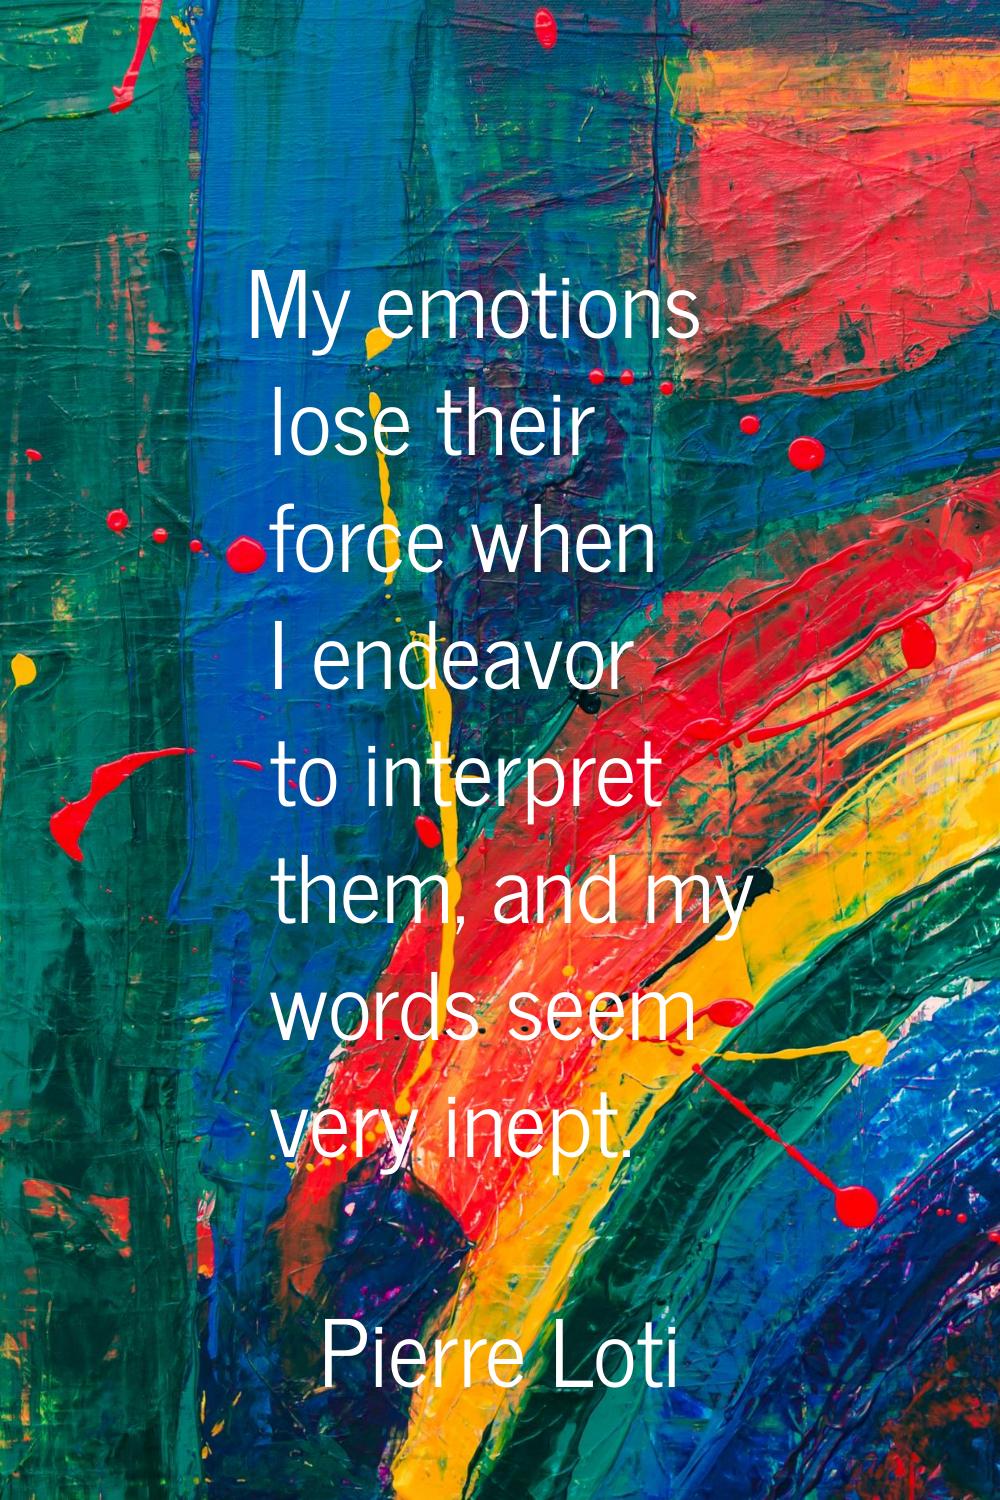 My emotions lose their force when I endeavor to interpret them, and my words seem very inept.